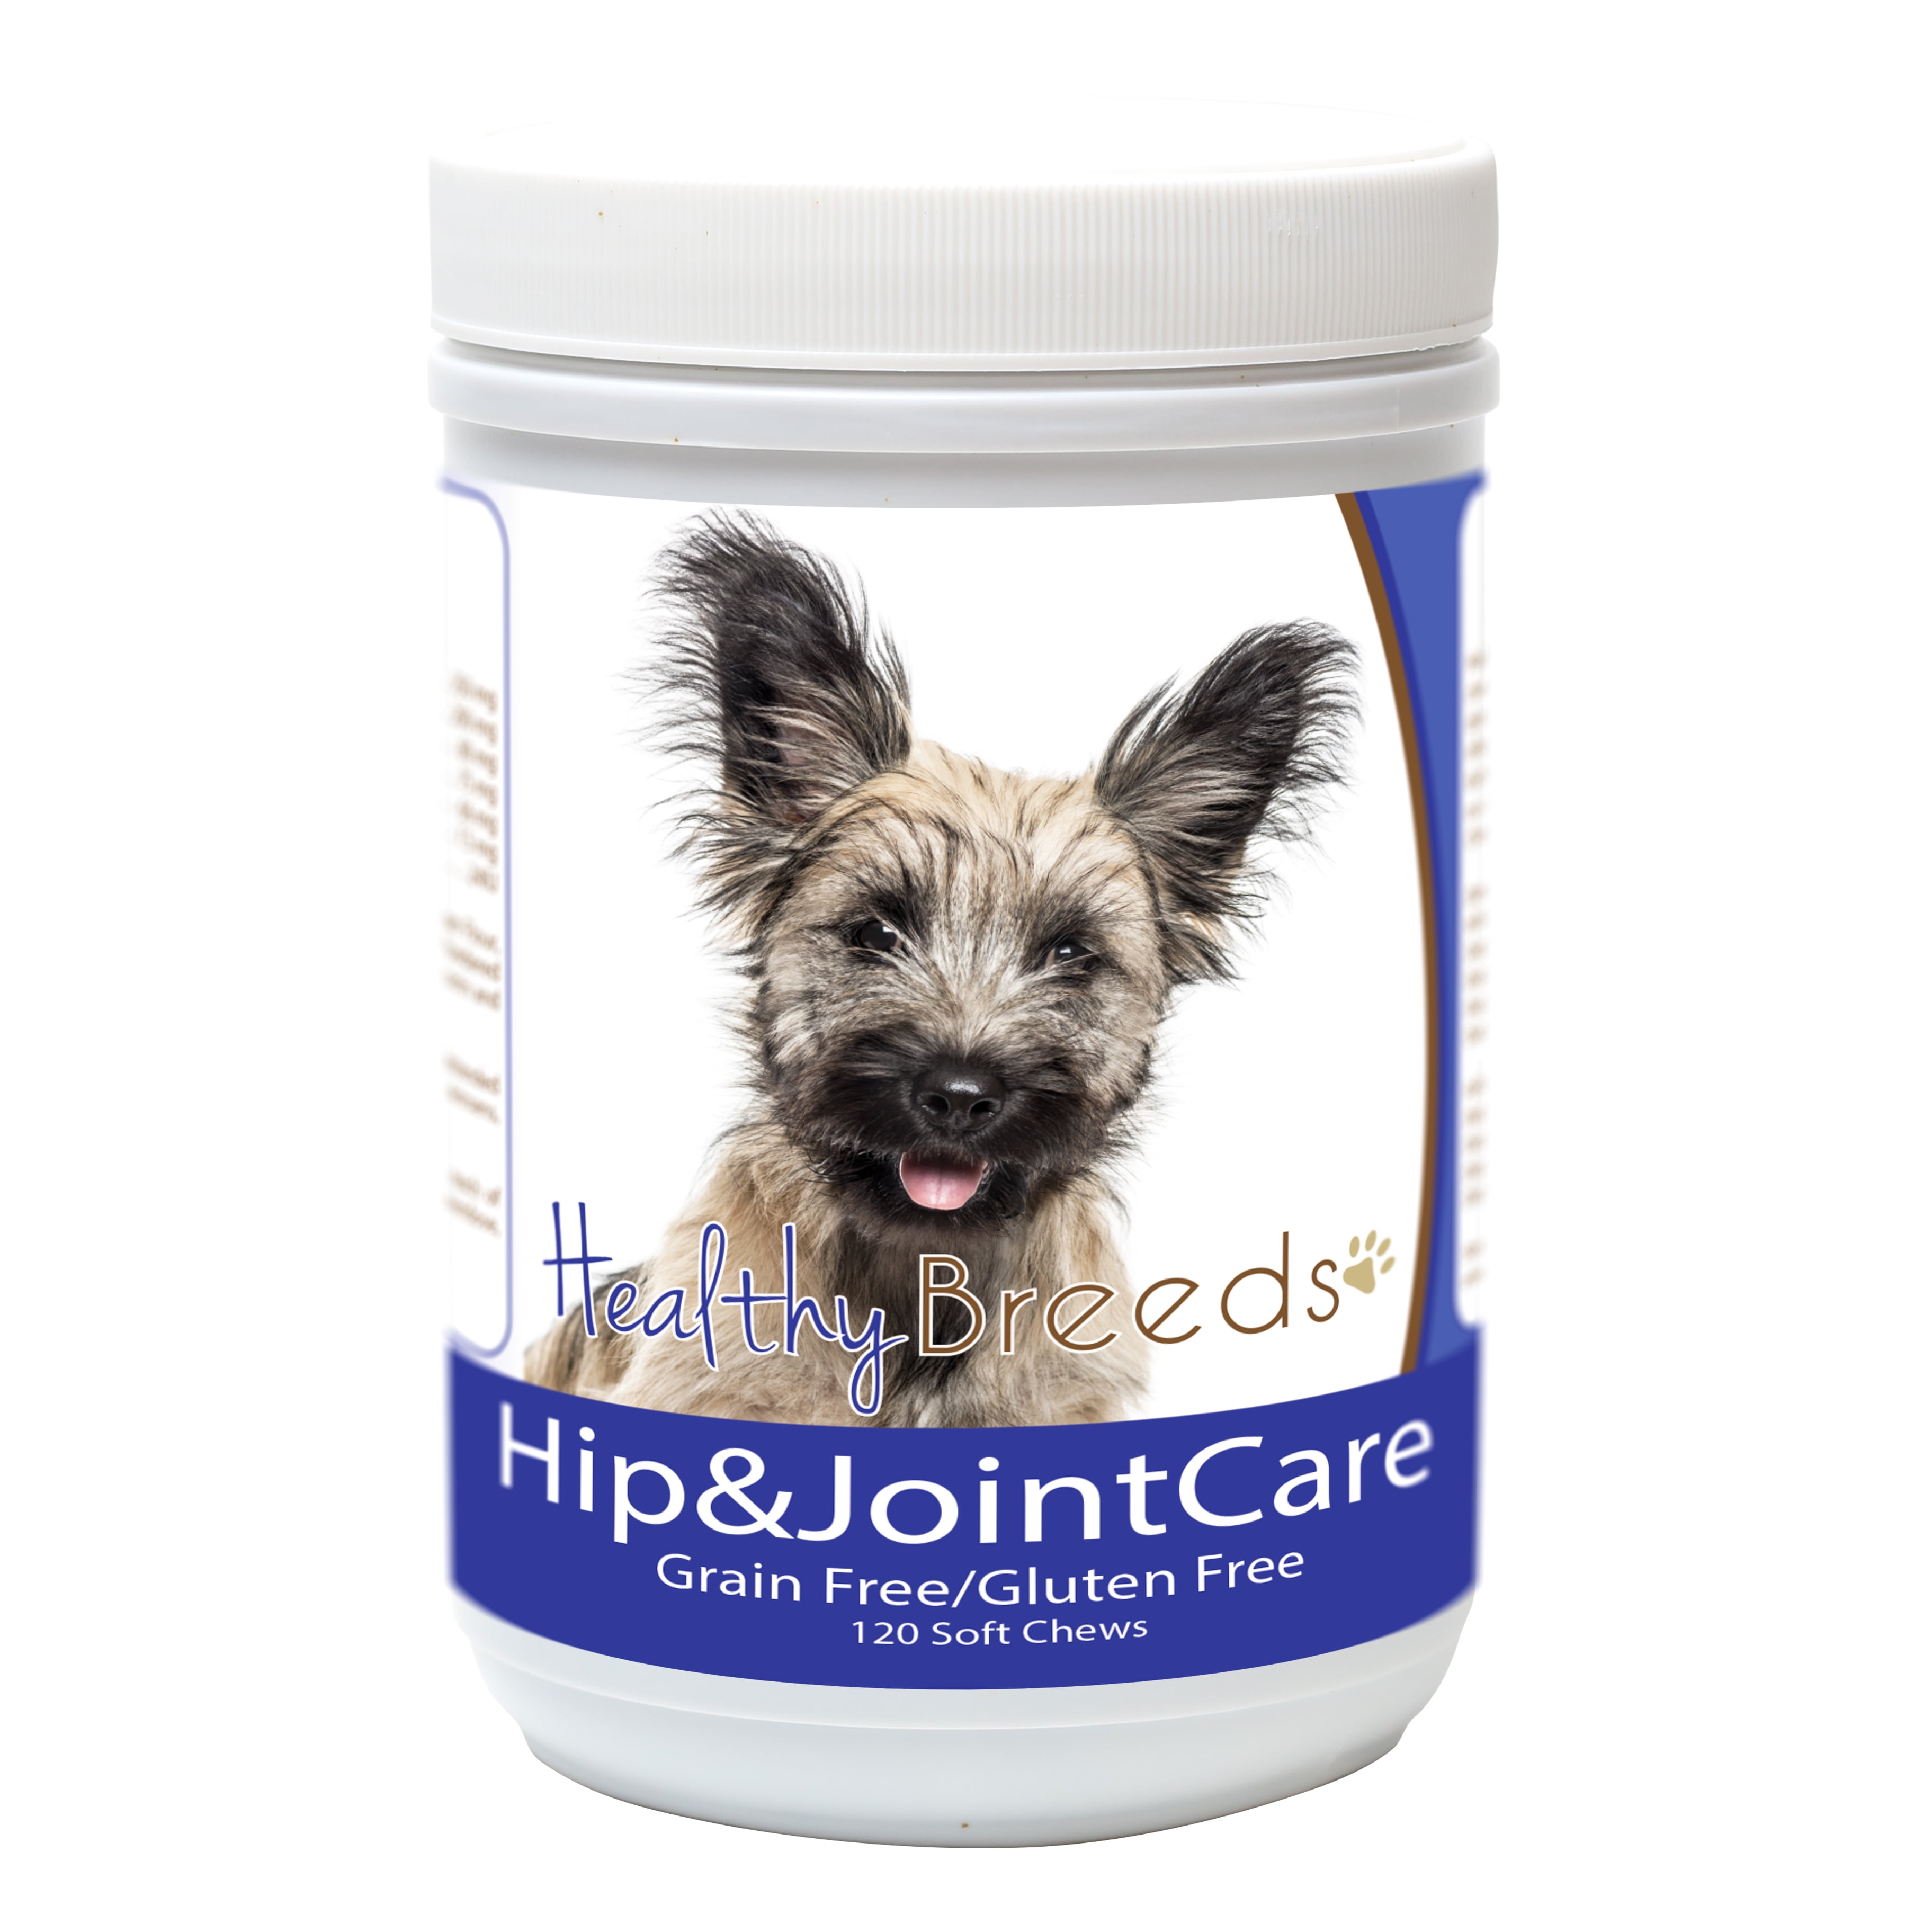 Healthy Breeds Skye Terrier Hip and Joint Care 120 Count ...